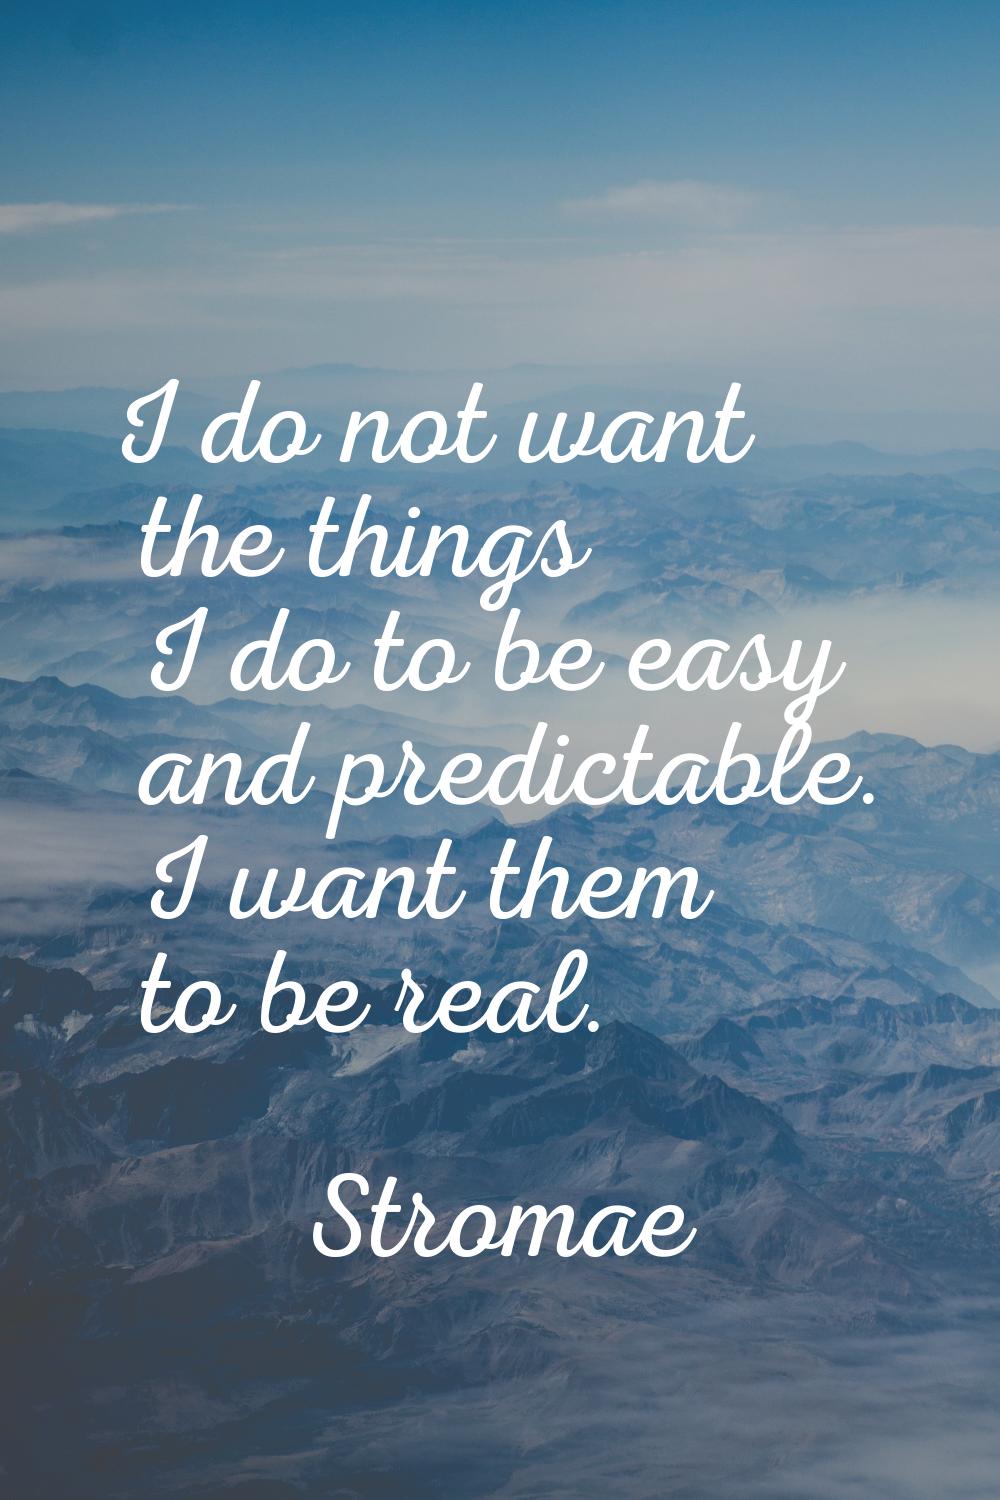 I do not want the things I do to be easy and predictable. I want them to be real.